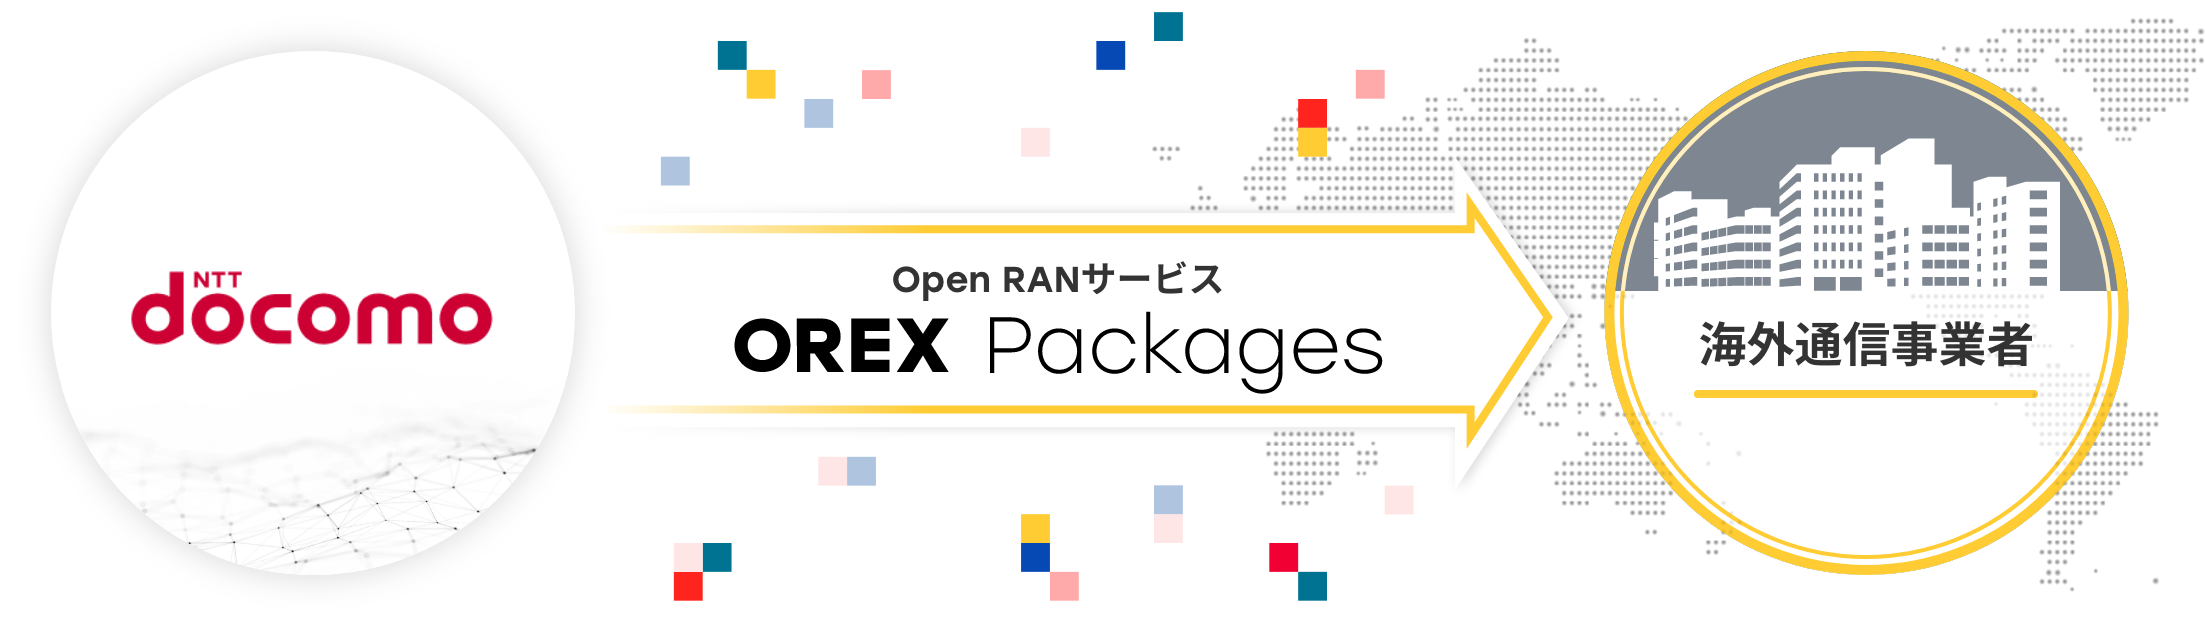 Open RAN services OREX Packages